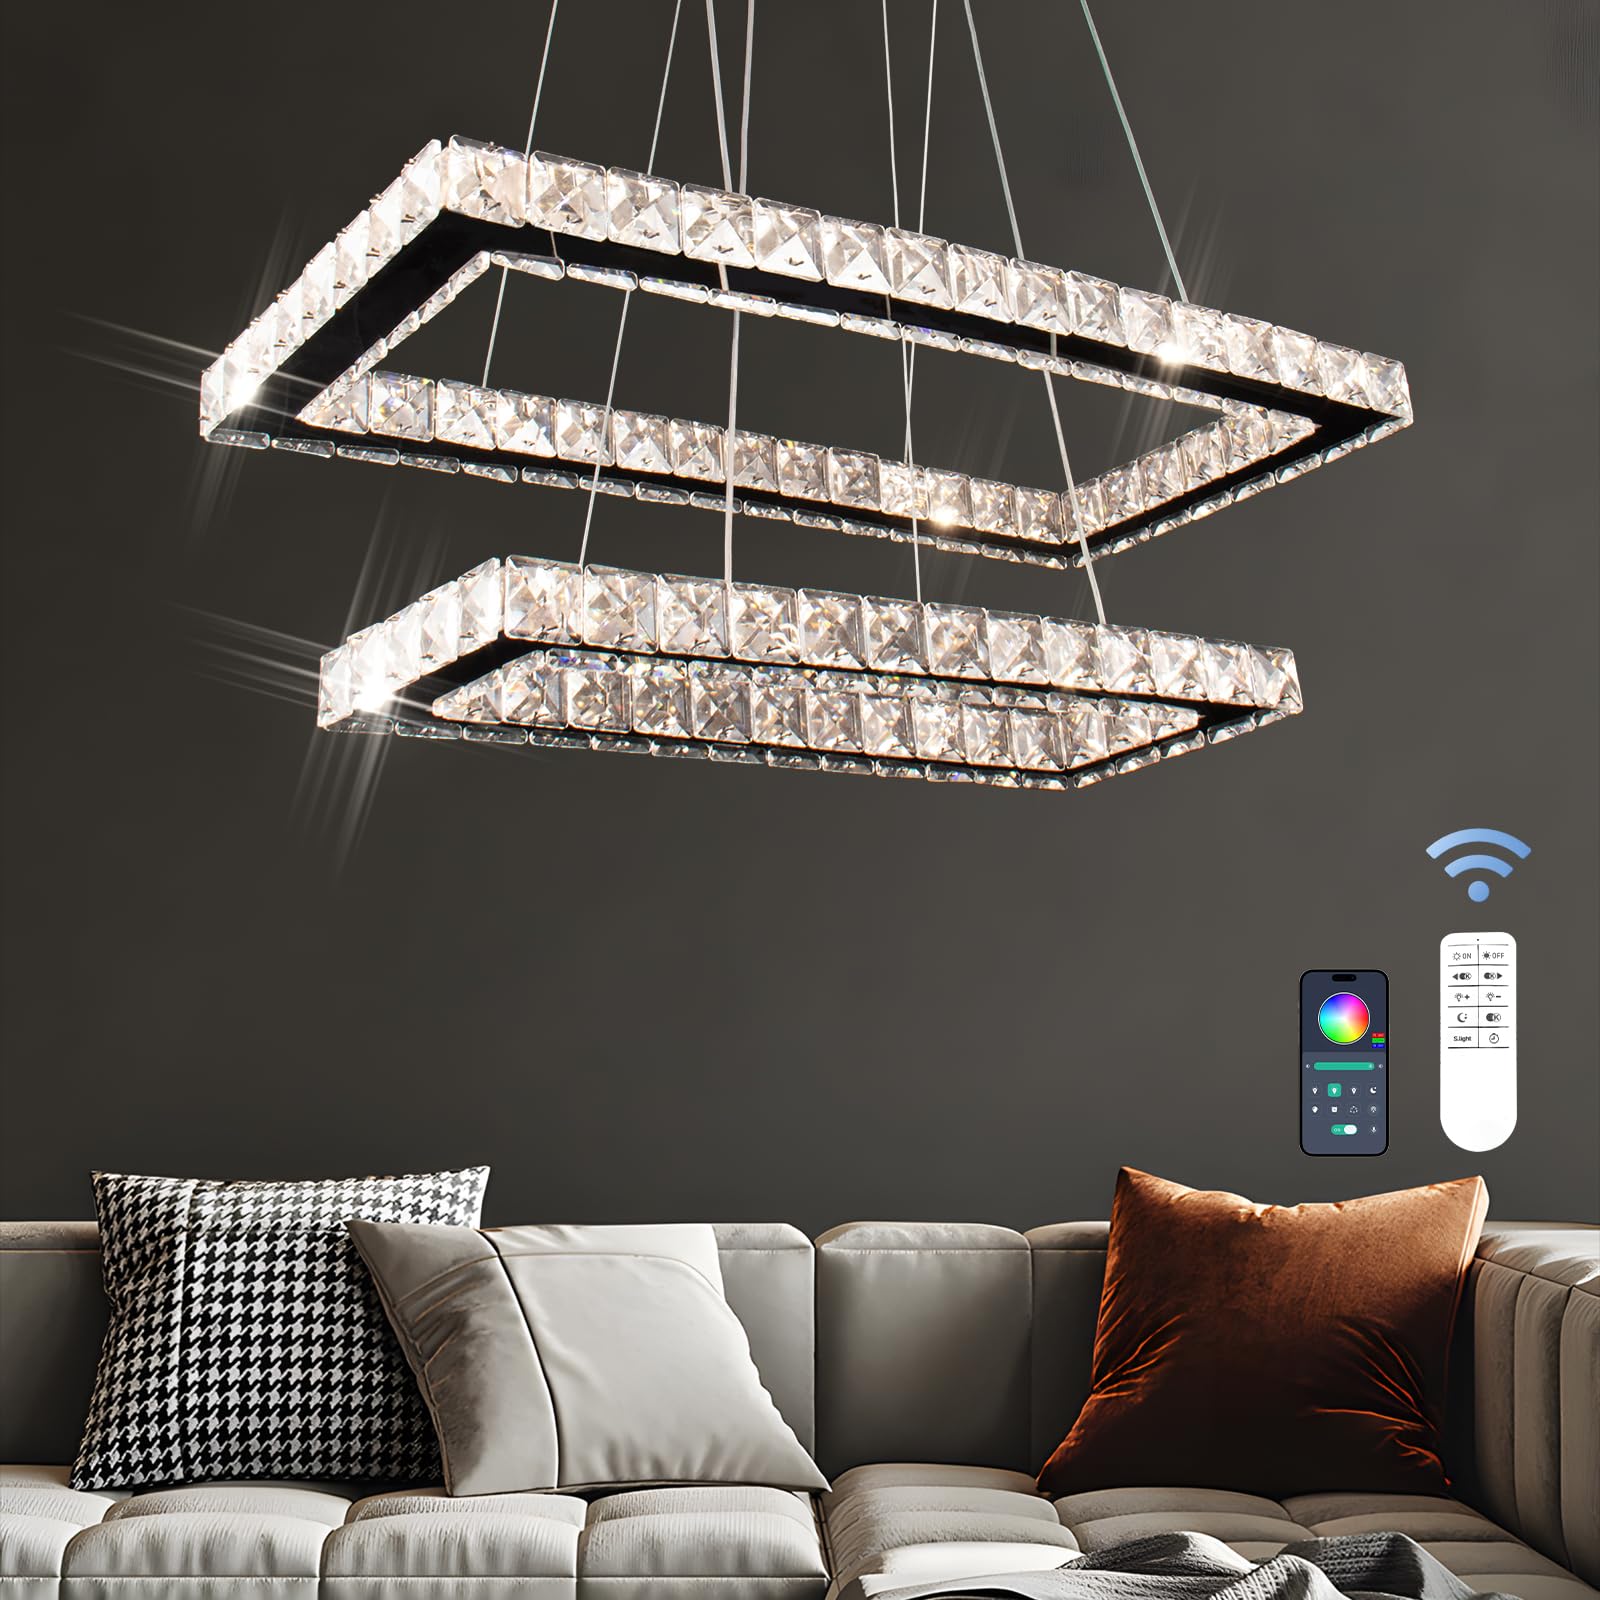 Modern Crystal Chandeliers with Remote, 20.5'' LED Dimmable 2 Rings Rectangular Crystal Chandelier Adjustable Height, Island Light Pendant Light for Dining Room Kitchen Living Room (Multicolored)